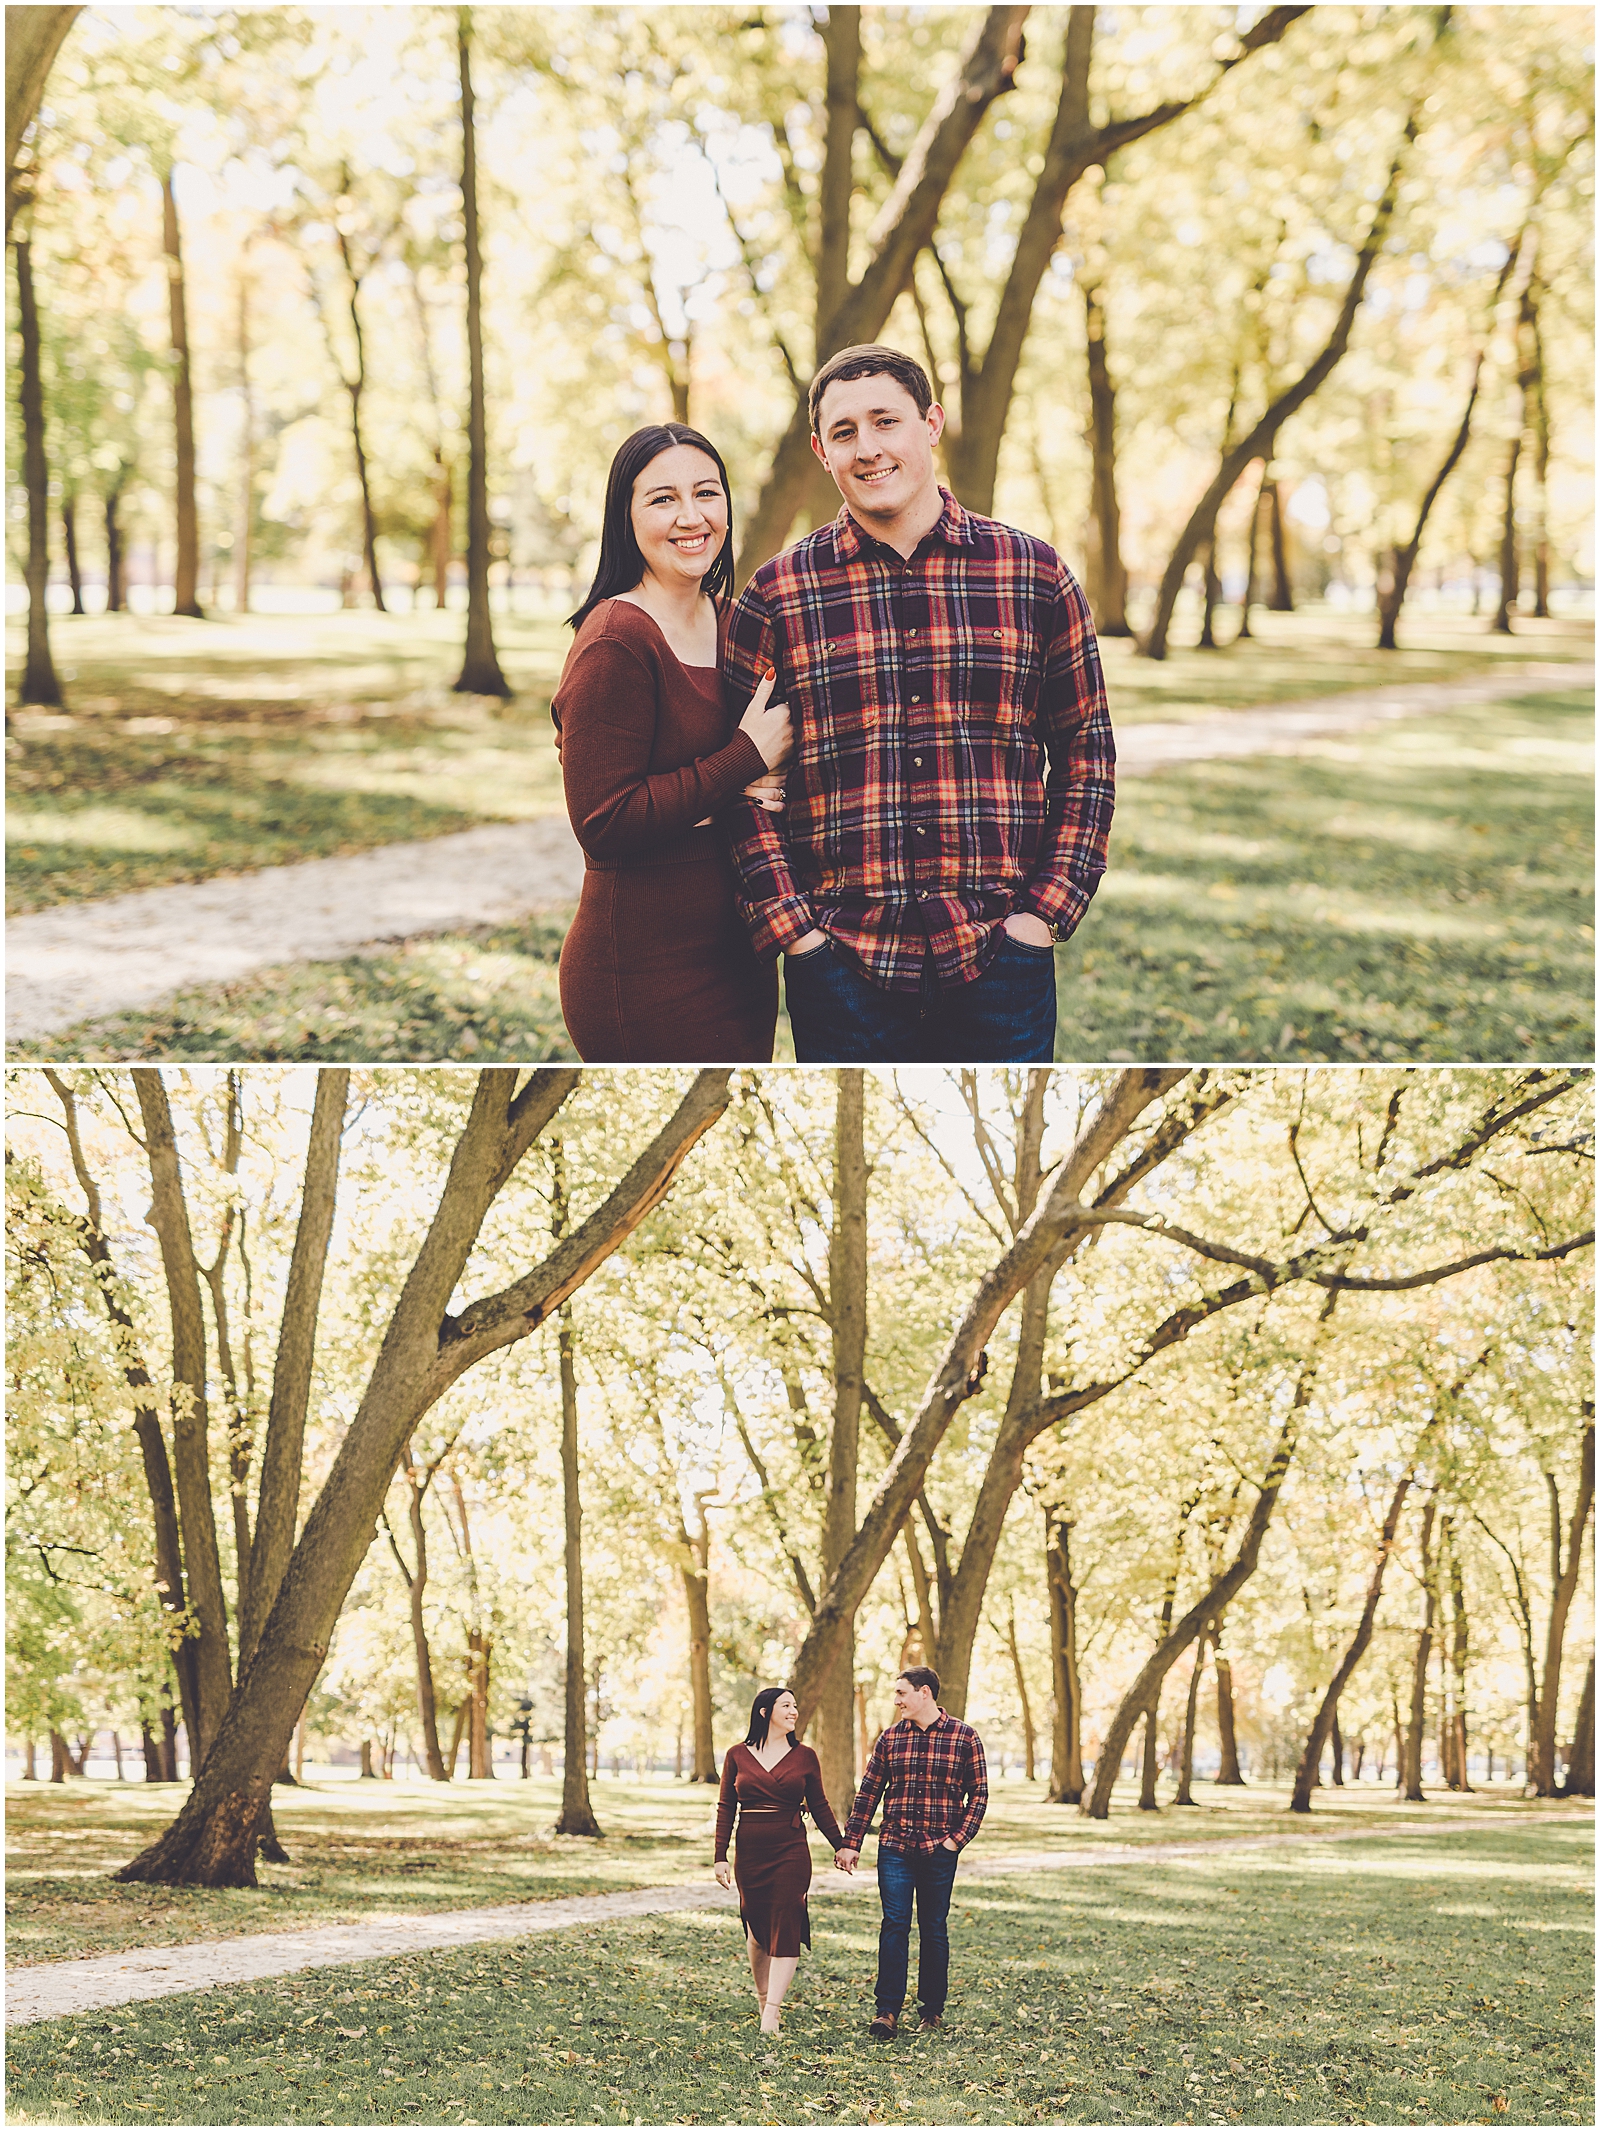 Fall mini sessions at Small Memorial Park in Kankakee with Bourbonnais and Kankakee County family photographer Kara Evans Photographer.